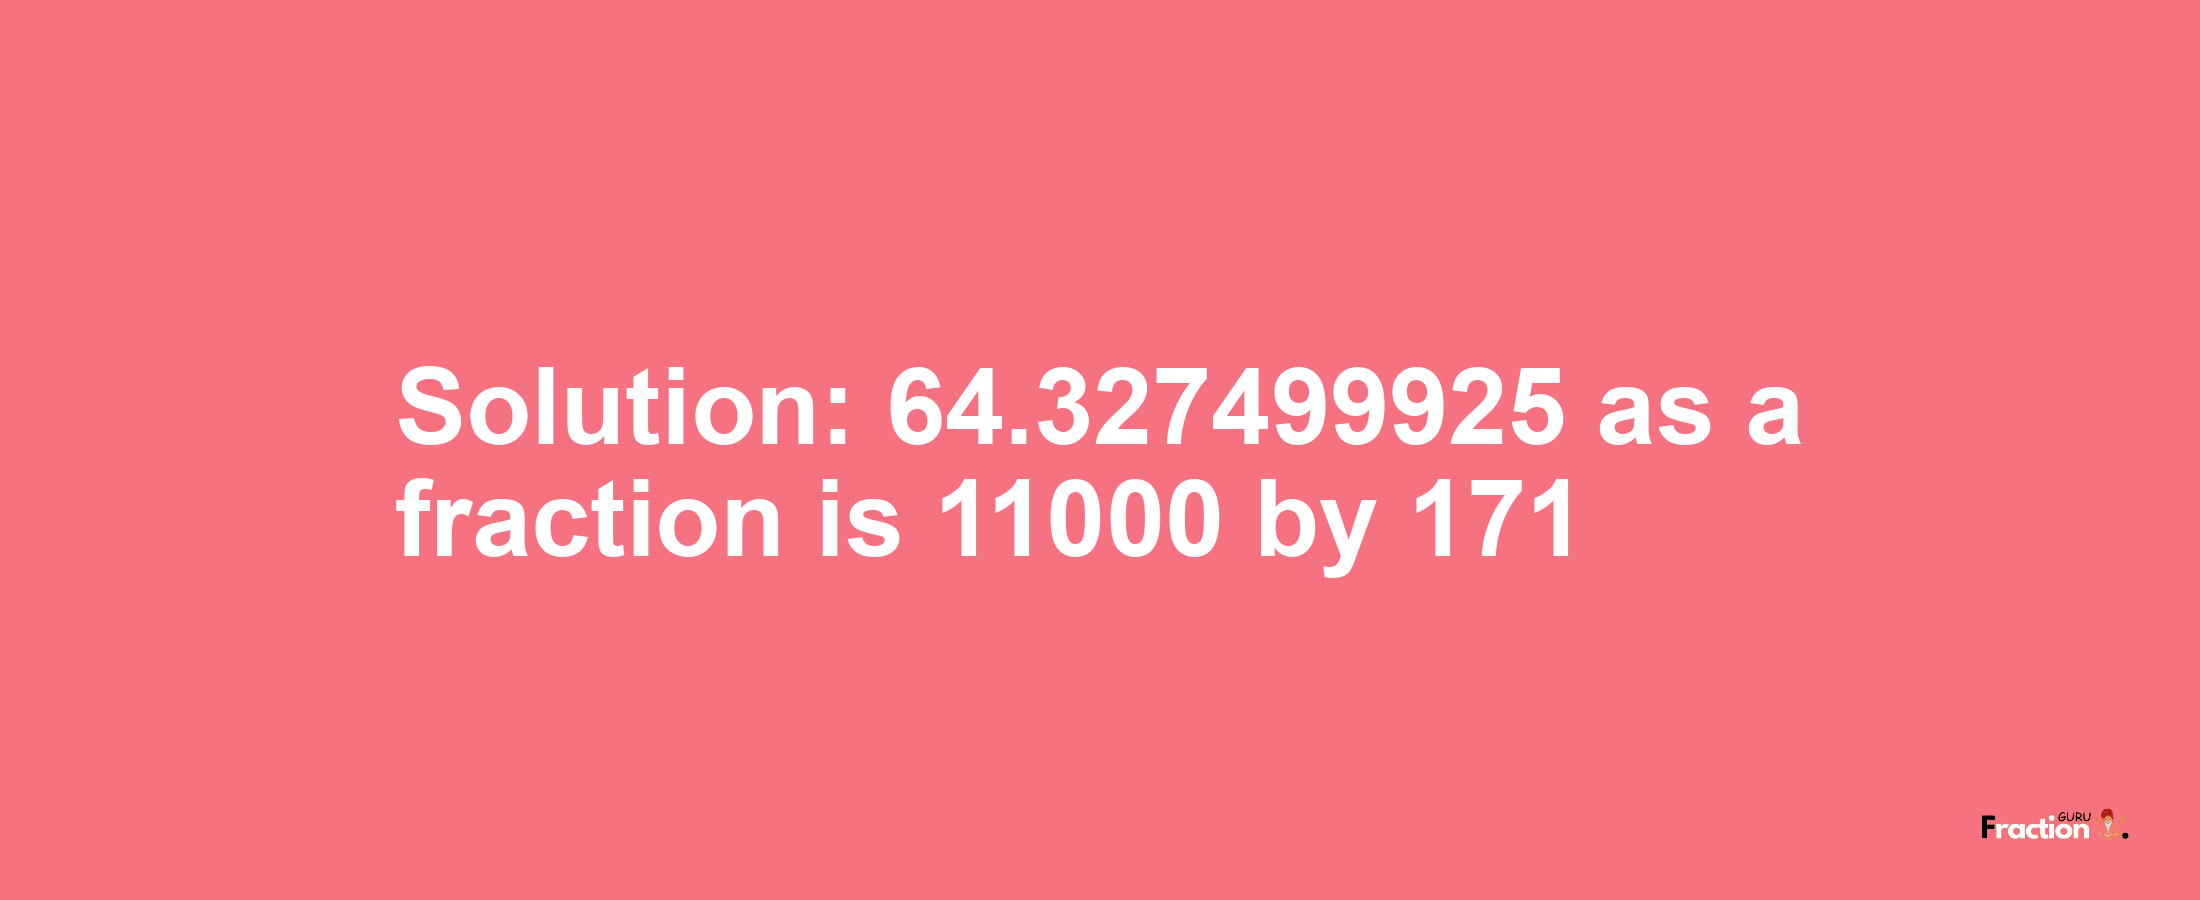 Solution:64.327499925 as a fraction is 11000/171